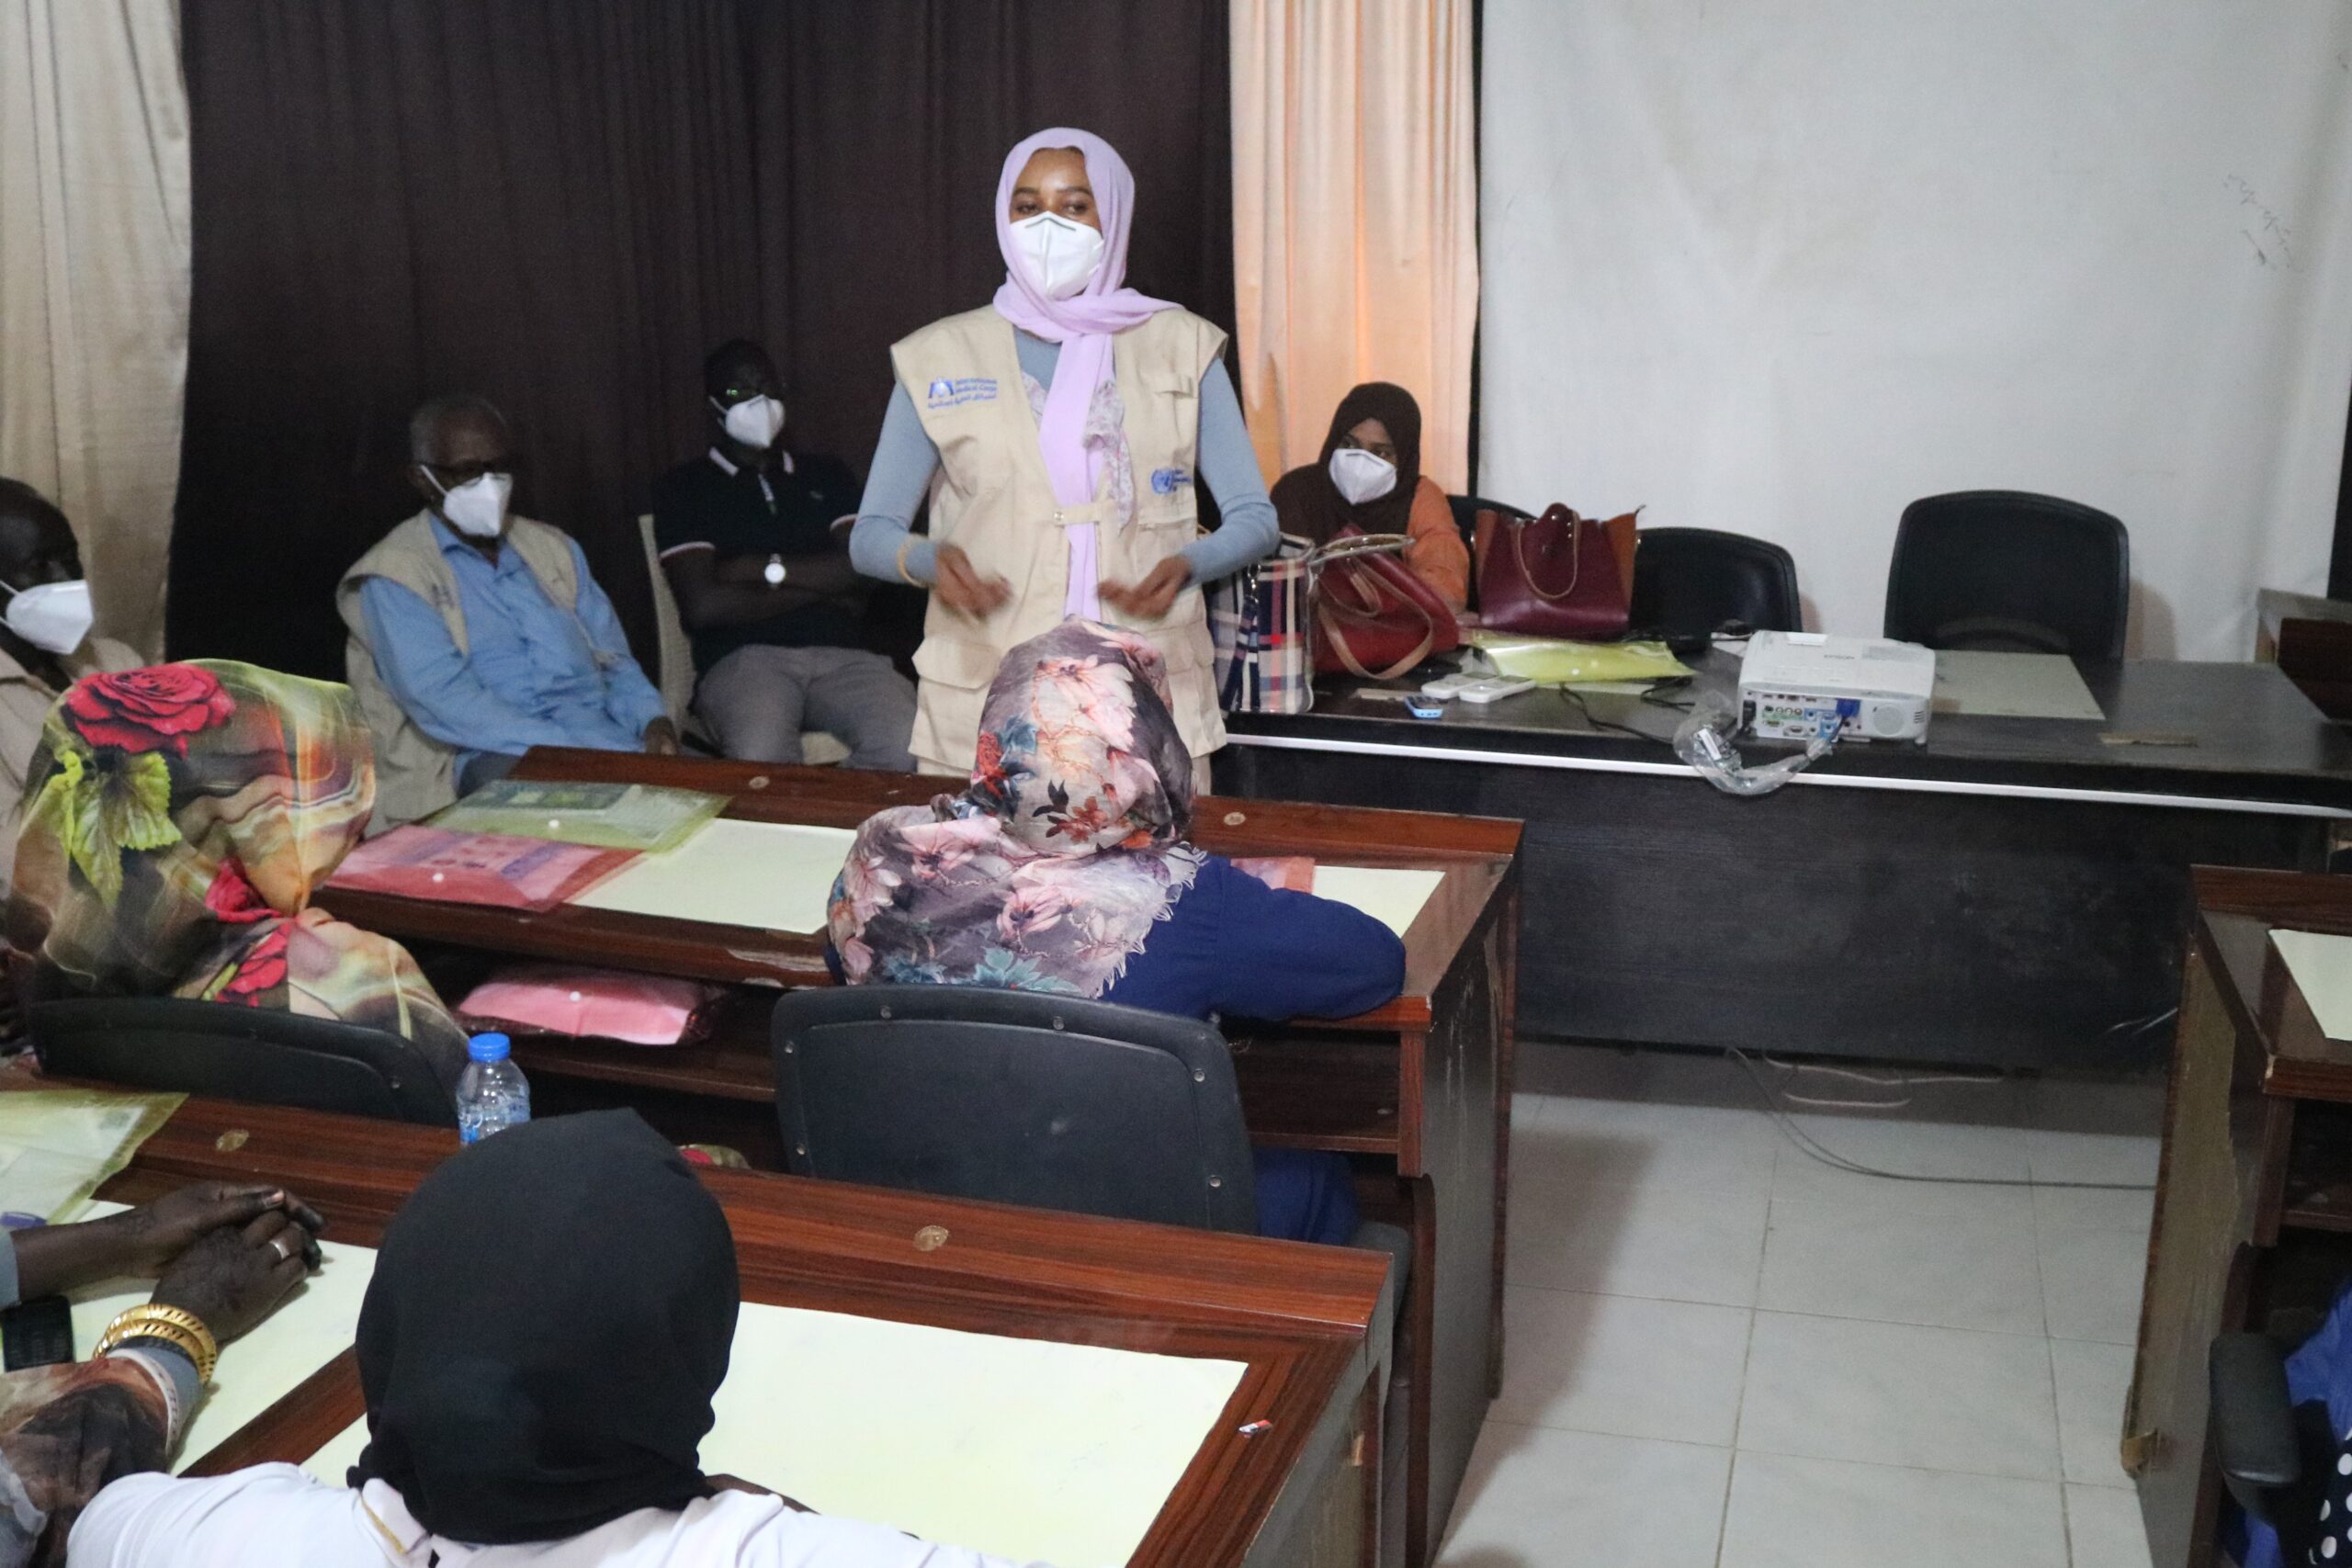 Rania Mohammed Abdalrahman Mohammed leads an infection prevention control training for clinic staff in Ad-Damazin, Sudan.